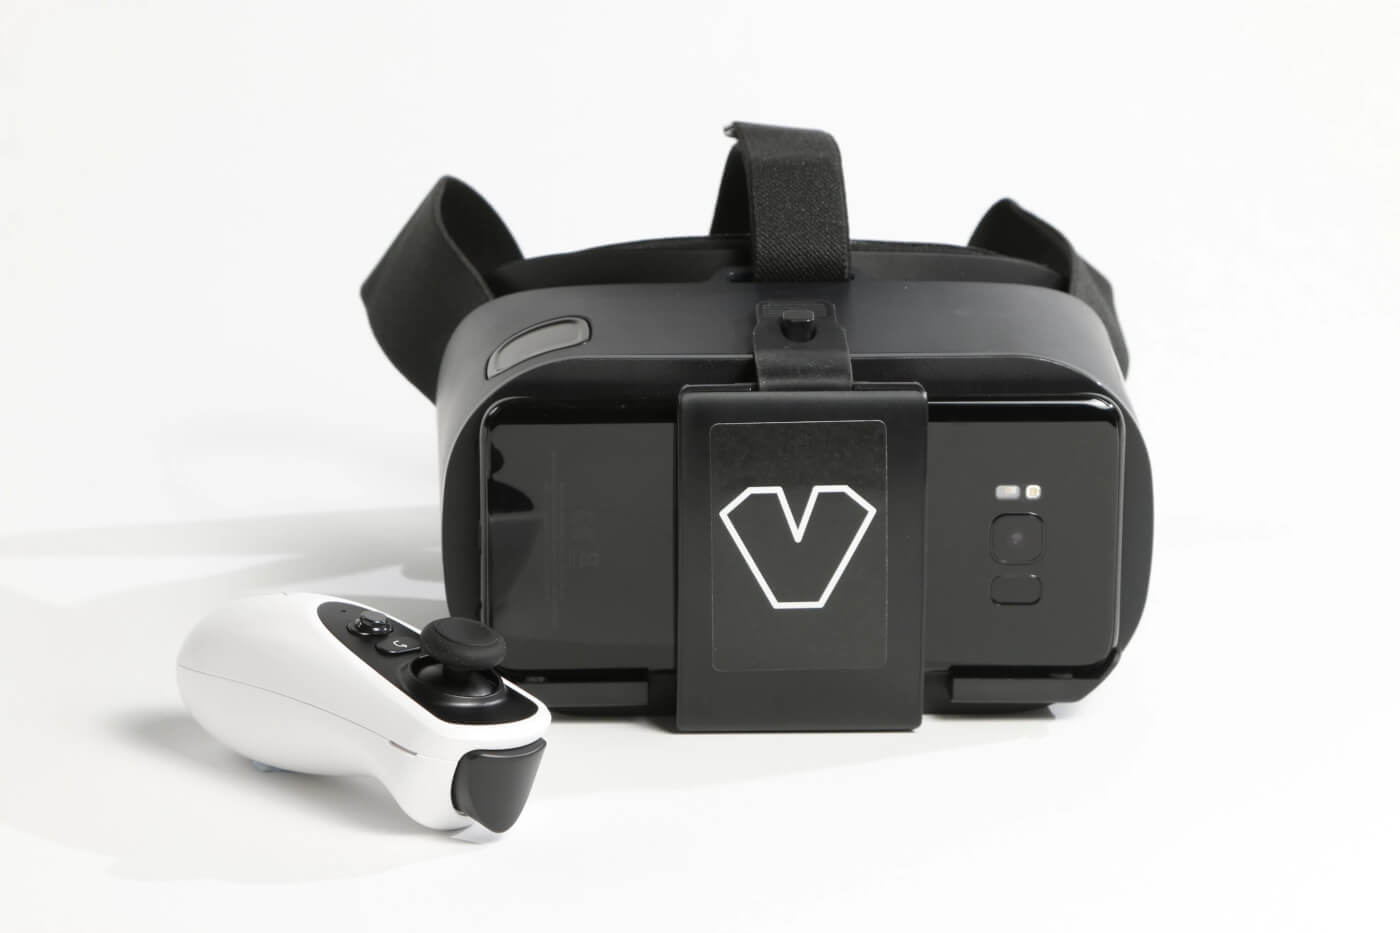 Recent Study Proves GiveVision VR Device Helps Visually Impaired Persons Recover Eyesight